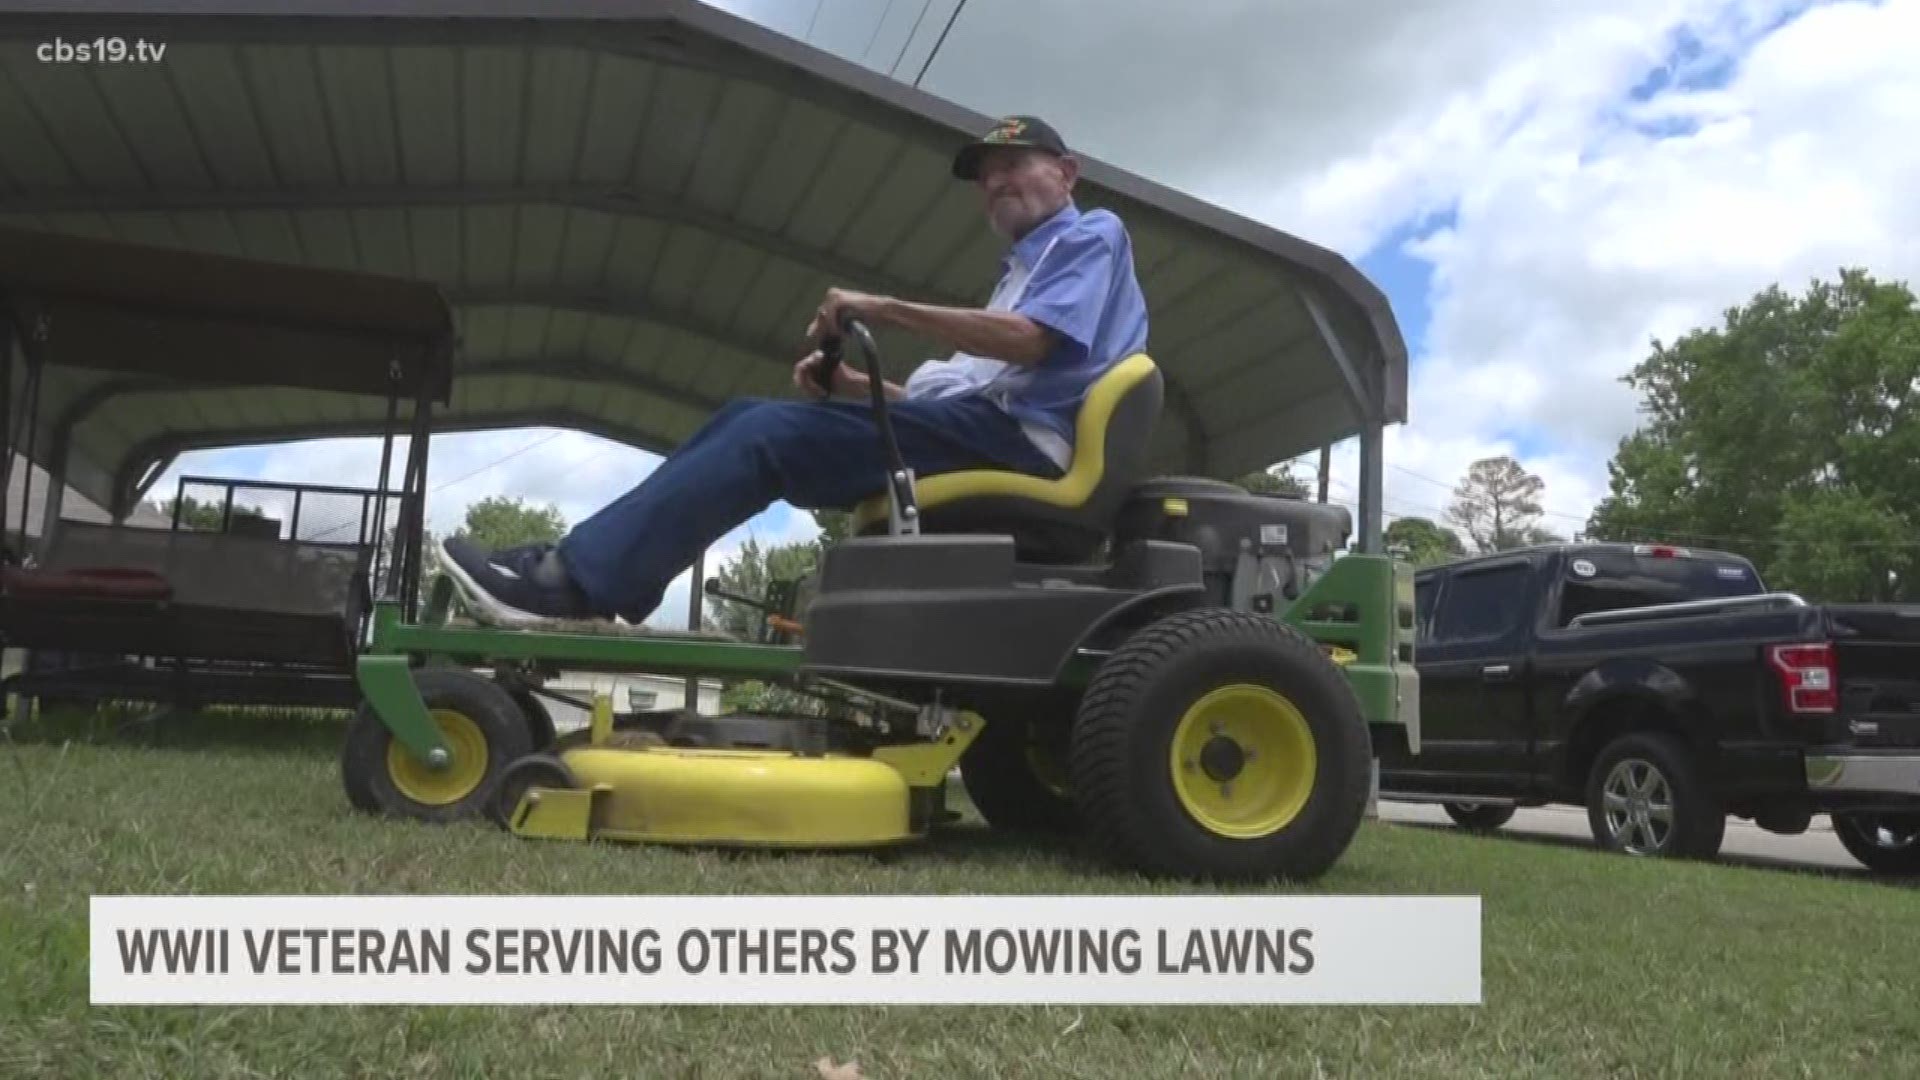 He's a survivor of the New London School explosion in 1937. He served in the Navy in World War II. Now, the 94-year-old mows lawn for fun.